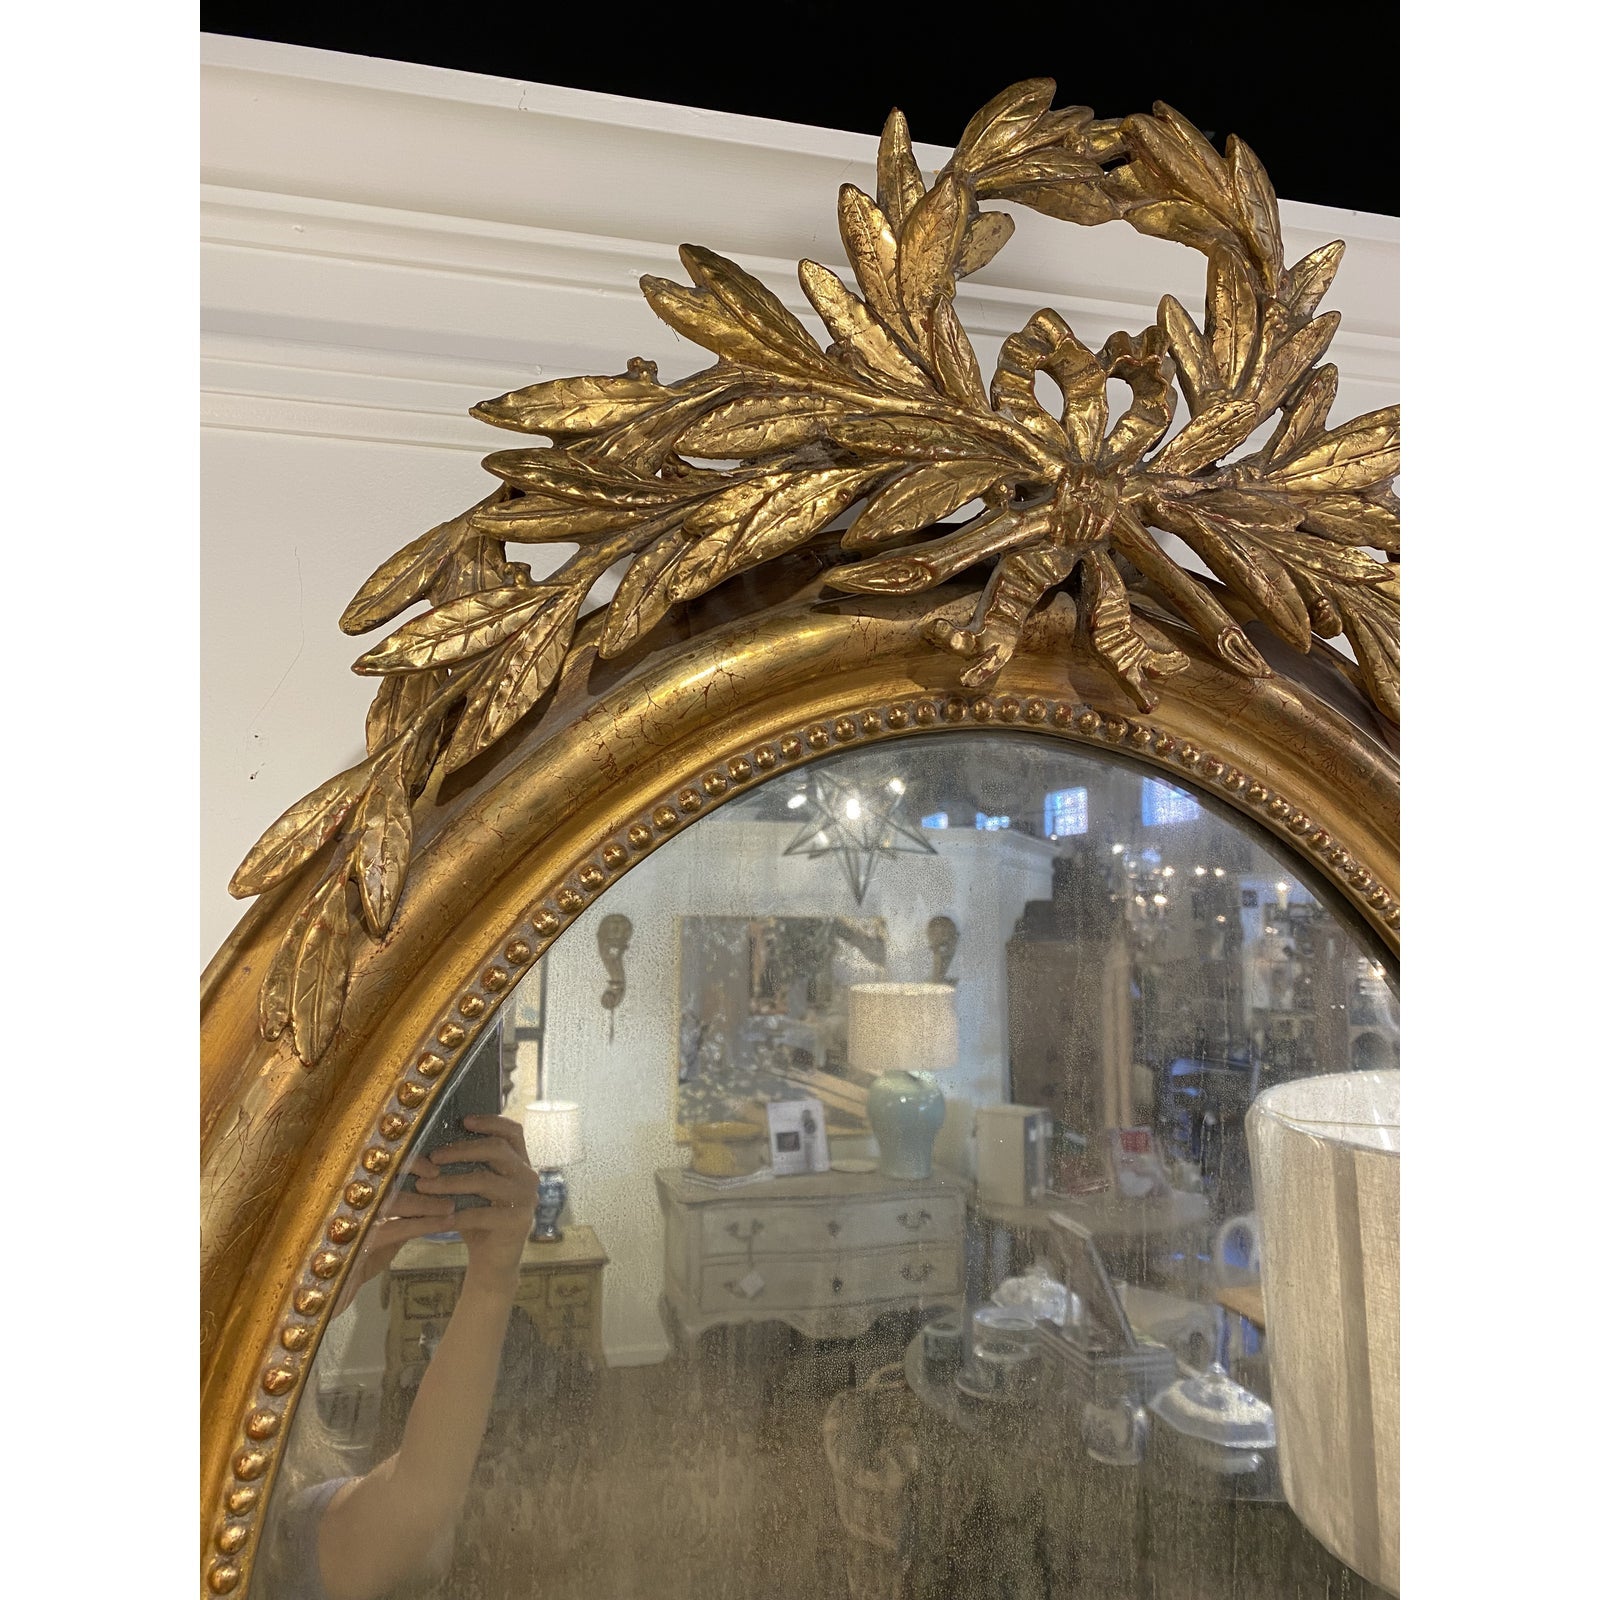 French Oval Louis Philippe Mirror